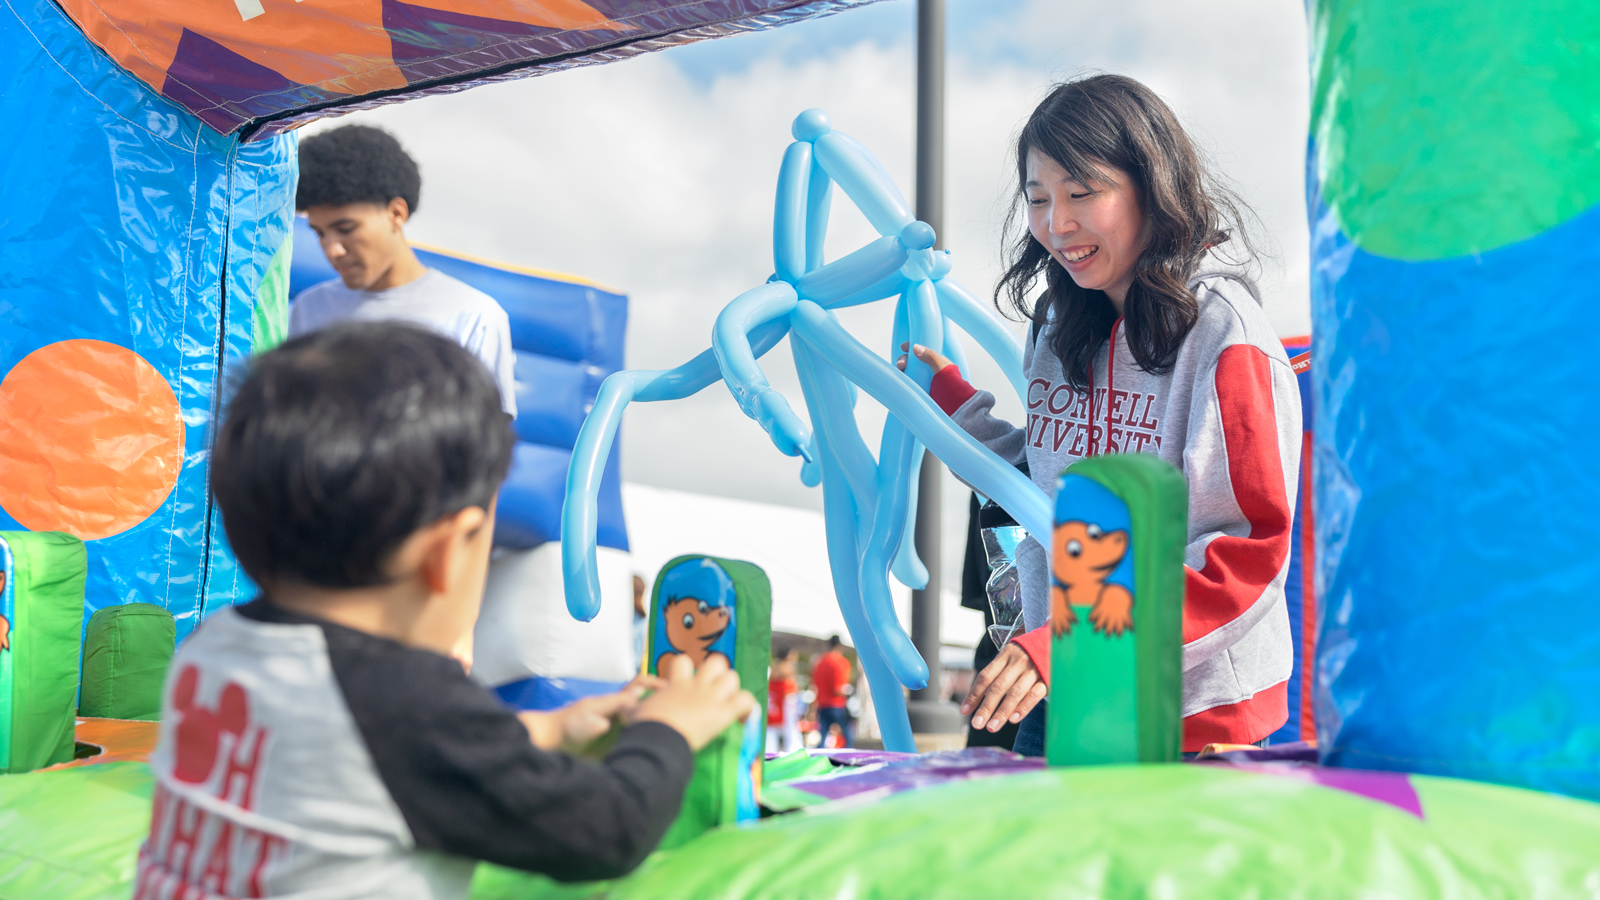 Balloon animals and activities for kids at the Fan Festival during Homecoming